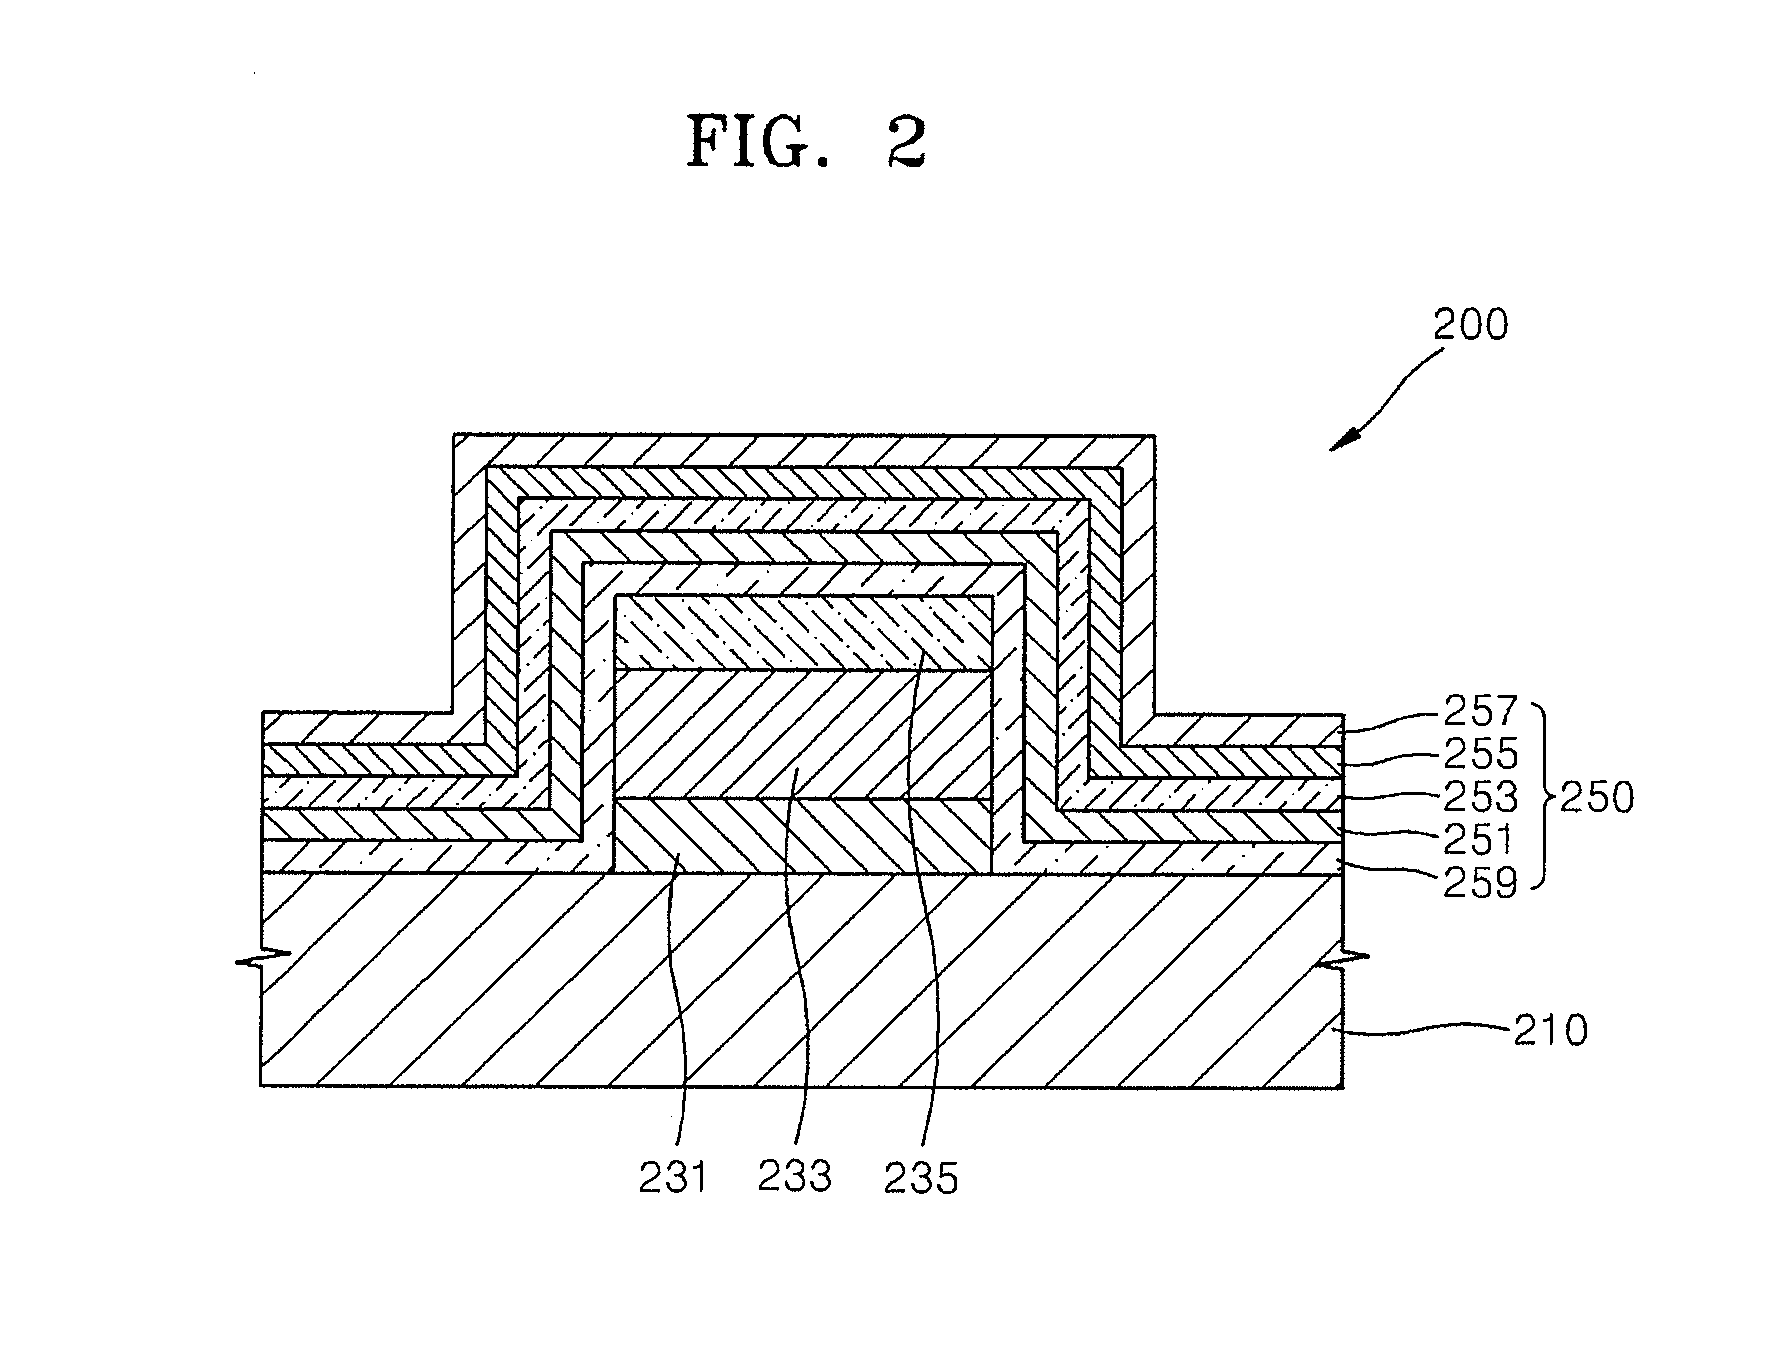 Organic light-emitting display apparatus having a hydroxyquinoline-based layer as part of the sealing structure and method of manufacturing the same